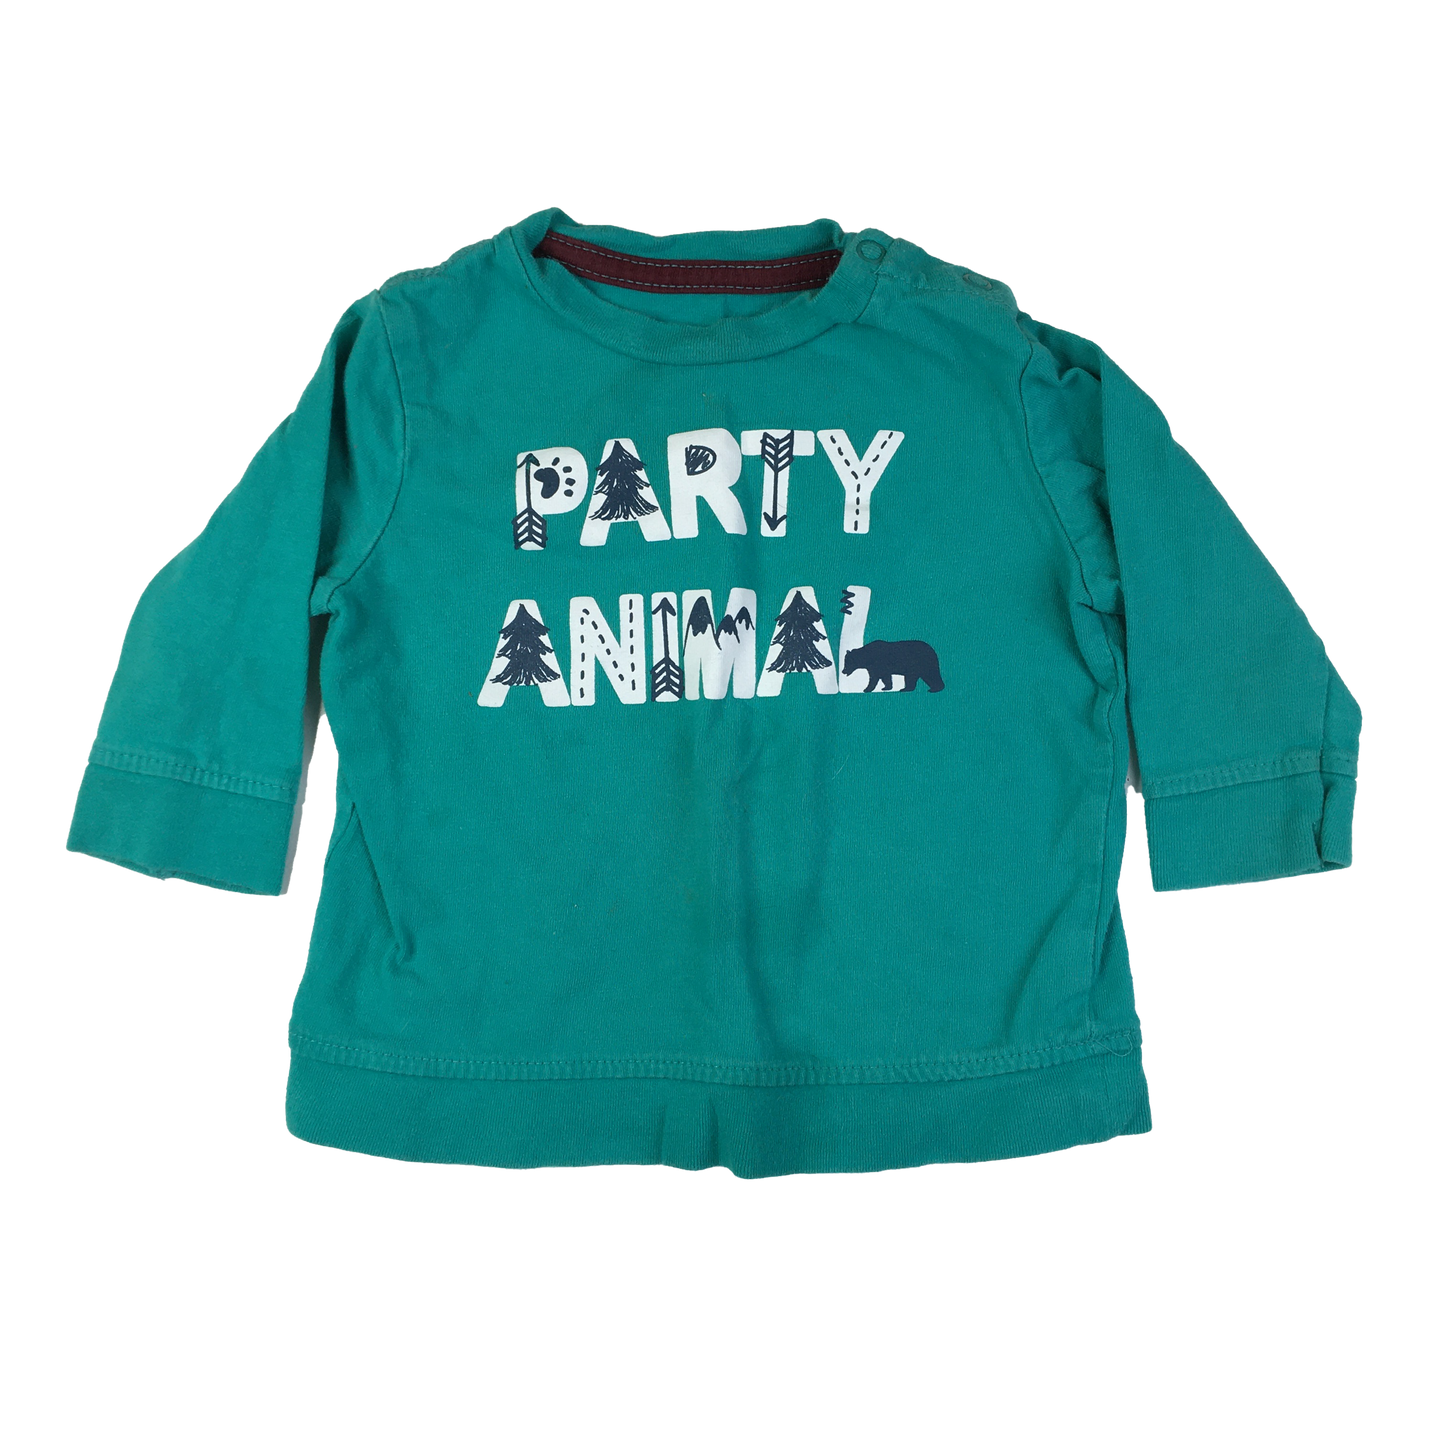 George Teal Long Sleeve Shirt "Party Animal" 6-12M